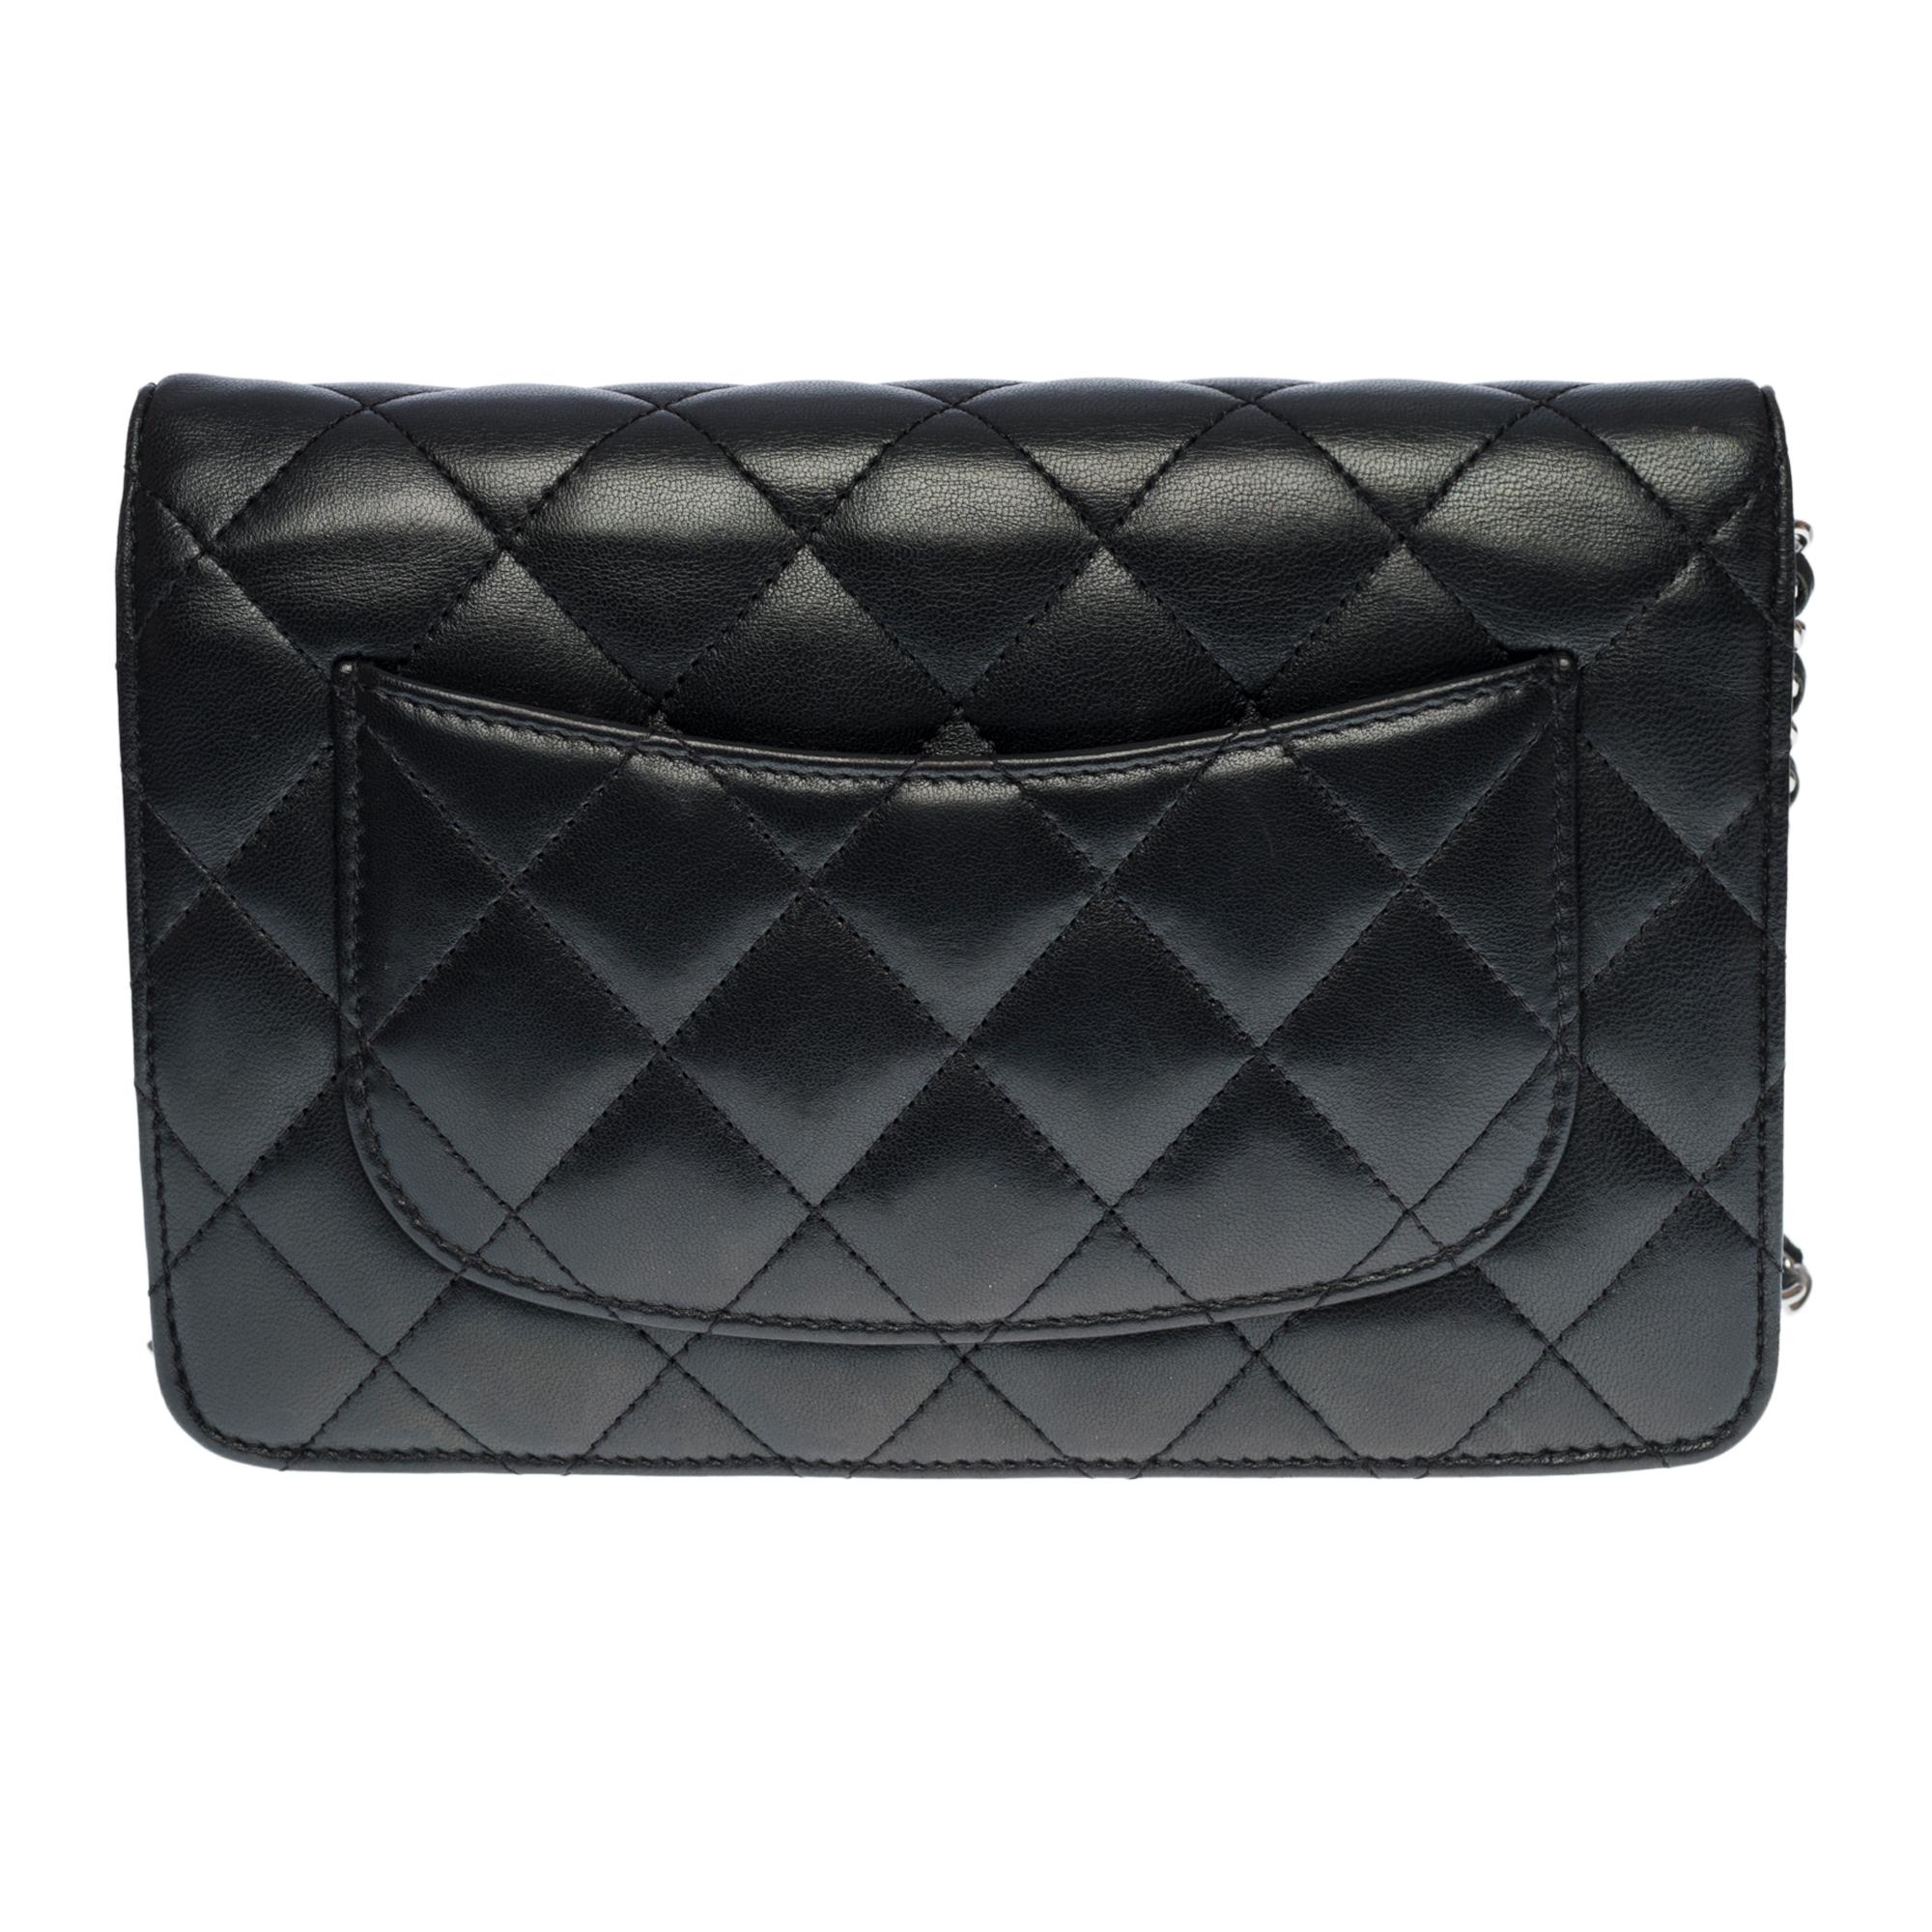 Lovely Chanel Wallet On Chain (WOC) bag in black quilted leather, silver metal hardware, a silver metal chain-handle interwoven with black leather for a shoulder and crossbody support


Silver metal flap closure
A patch pocket at the back of the